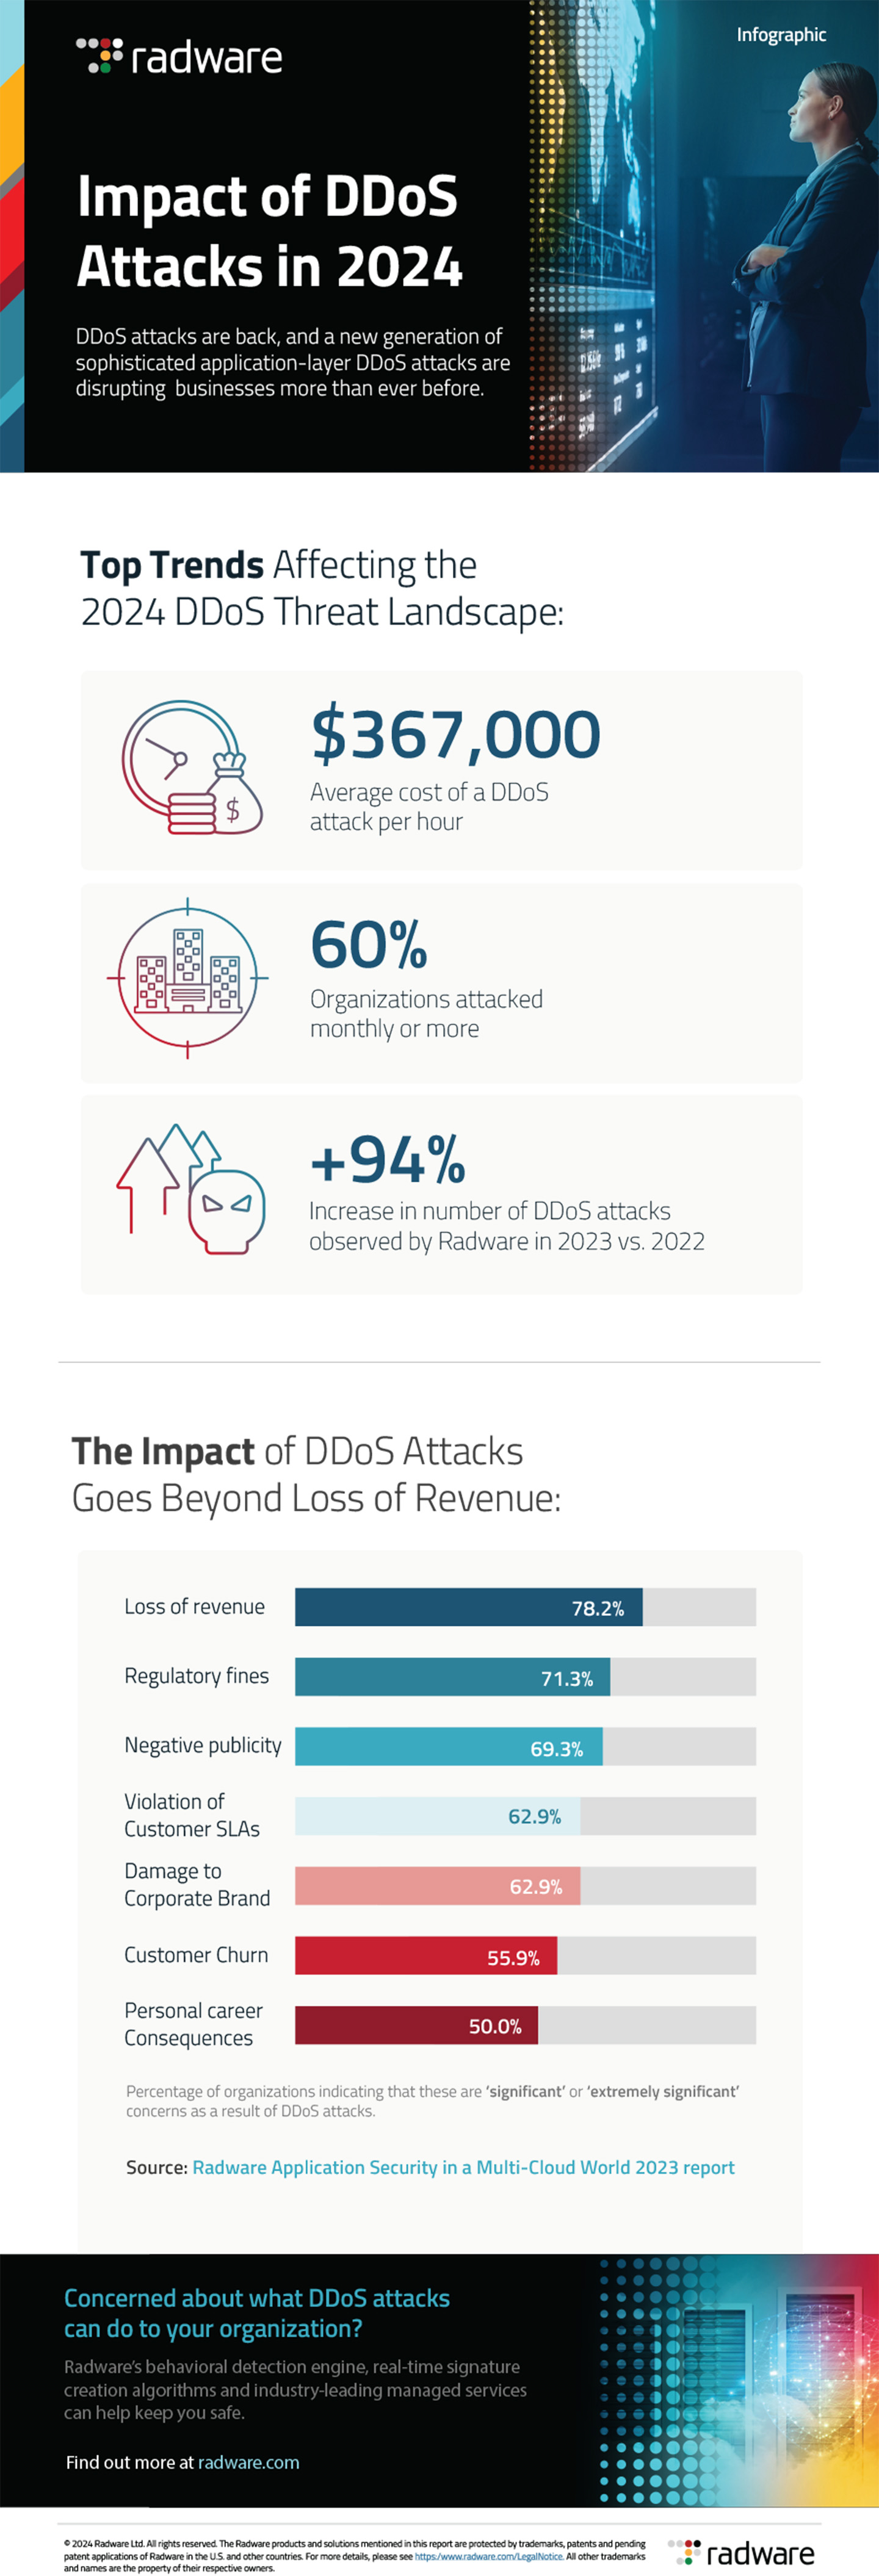 Impact of DDoS Attacks in 2024